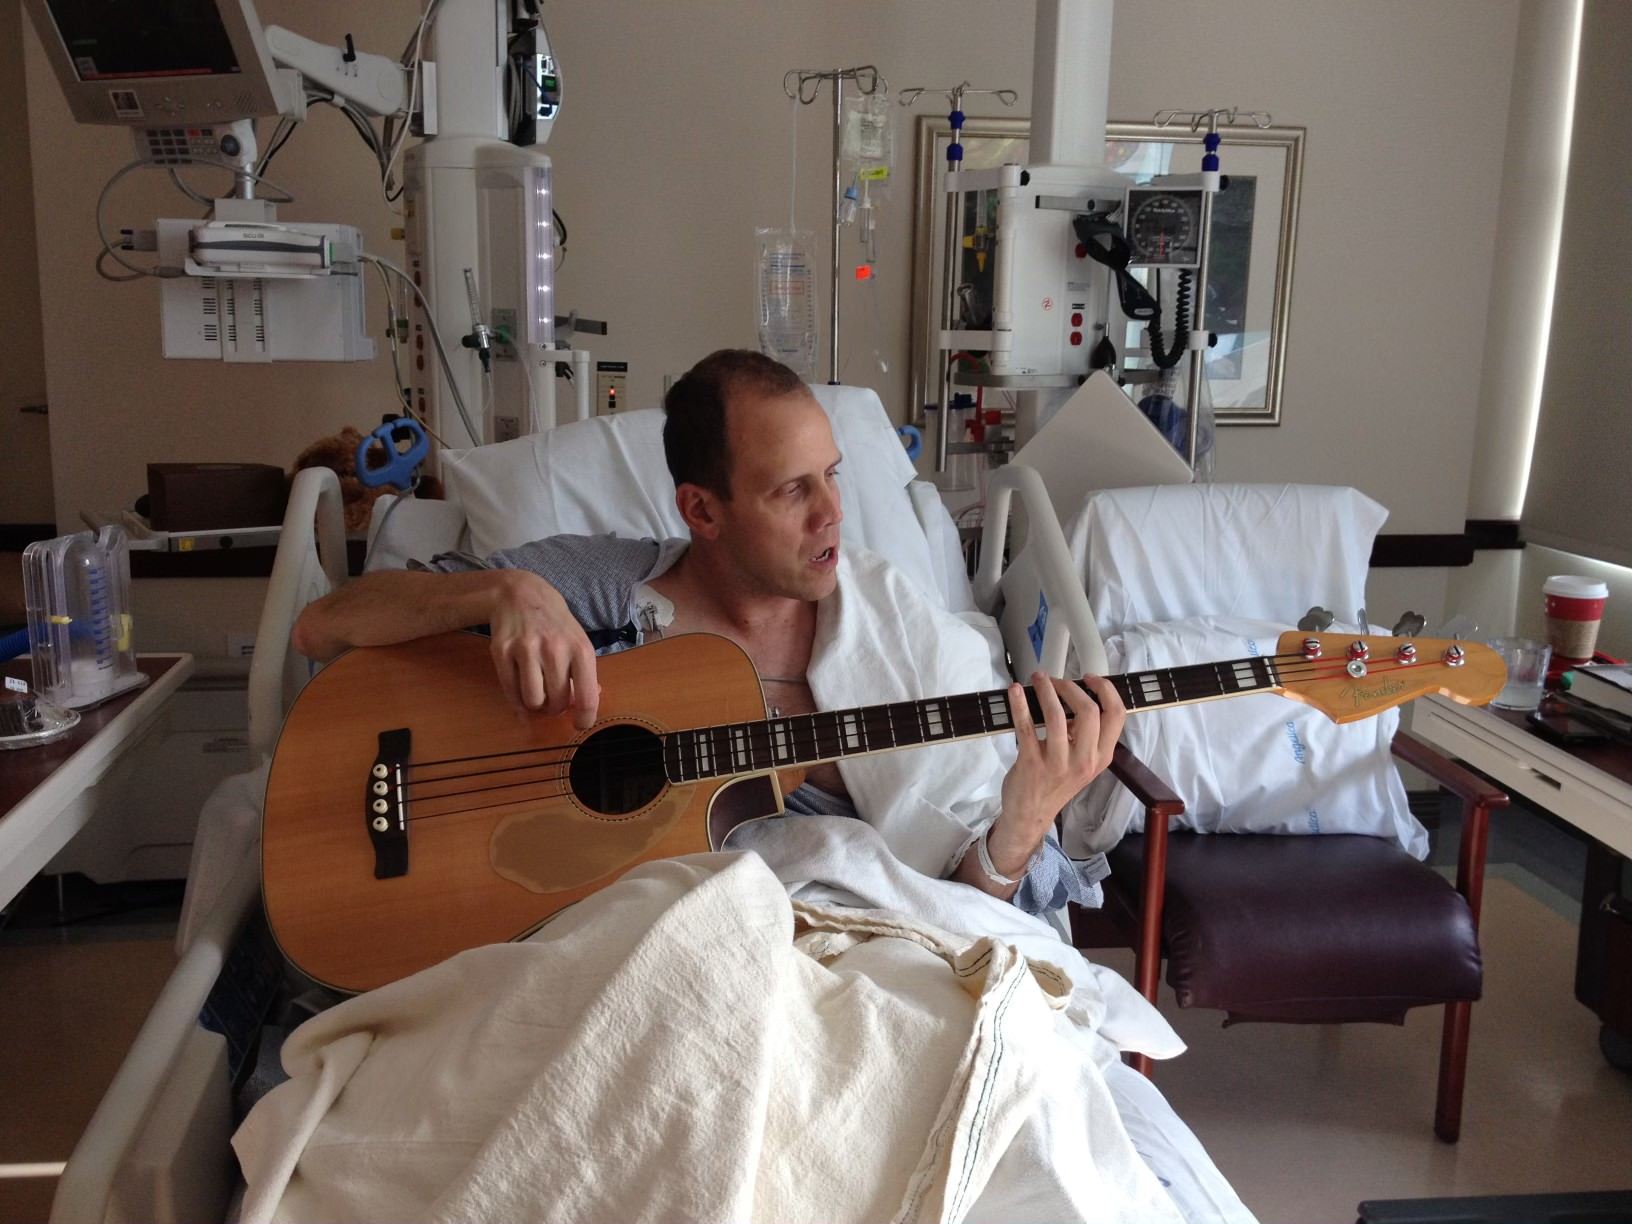 Doug playing bass guitar in a hospital bed.